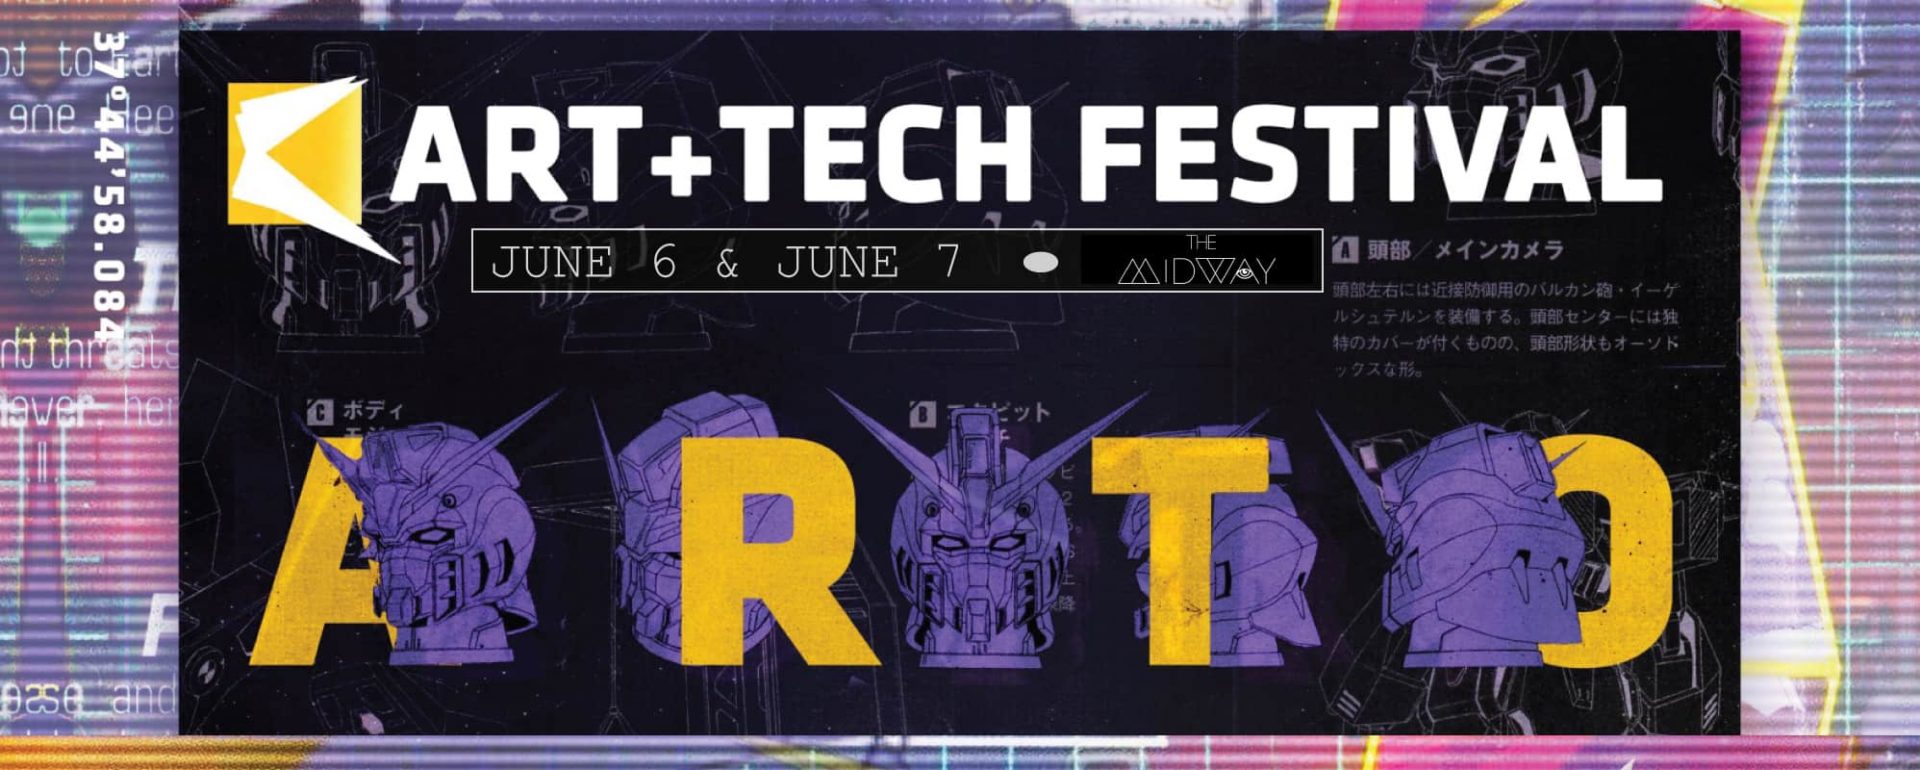 Art and Tech Festival at The Midway SF